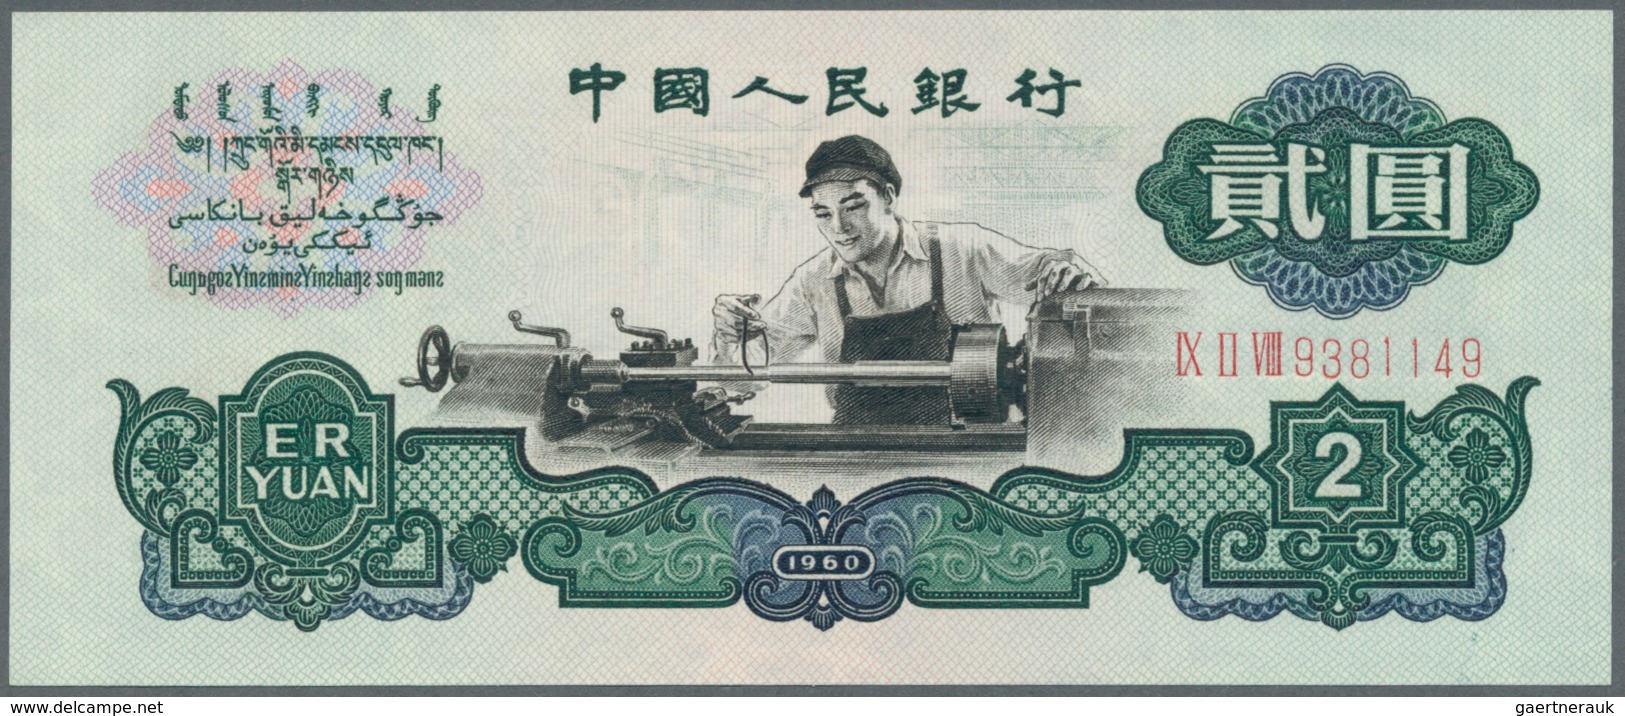 01305 China: 2 Yuan 1960 P. 875a, Crisp Paper, One Vertical Fold, Condition: XF To XF+. - Cina